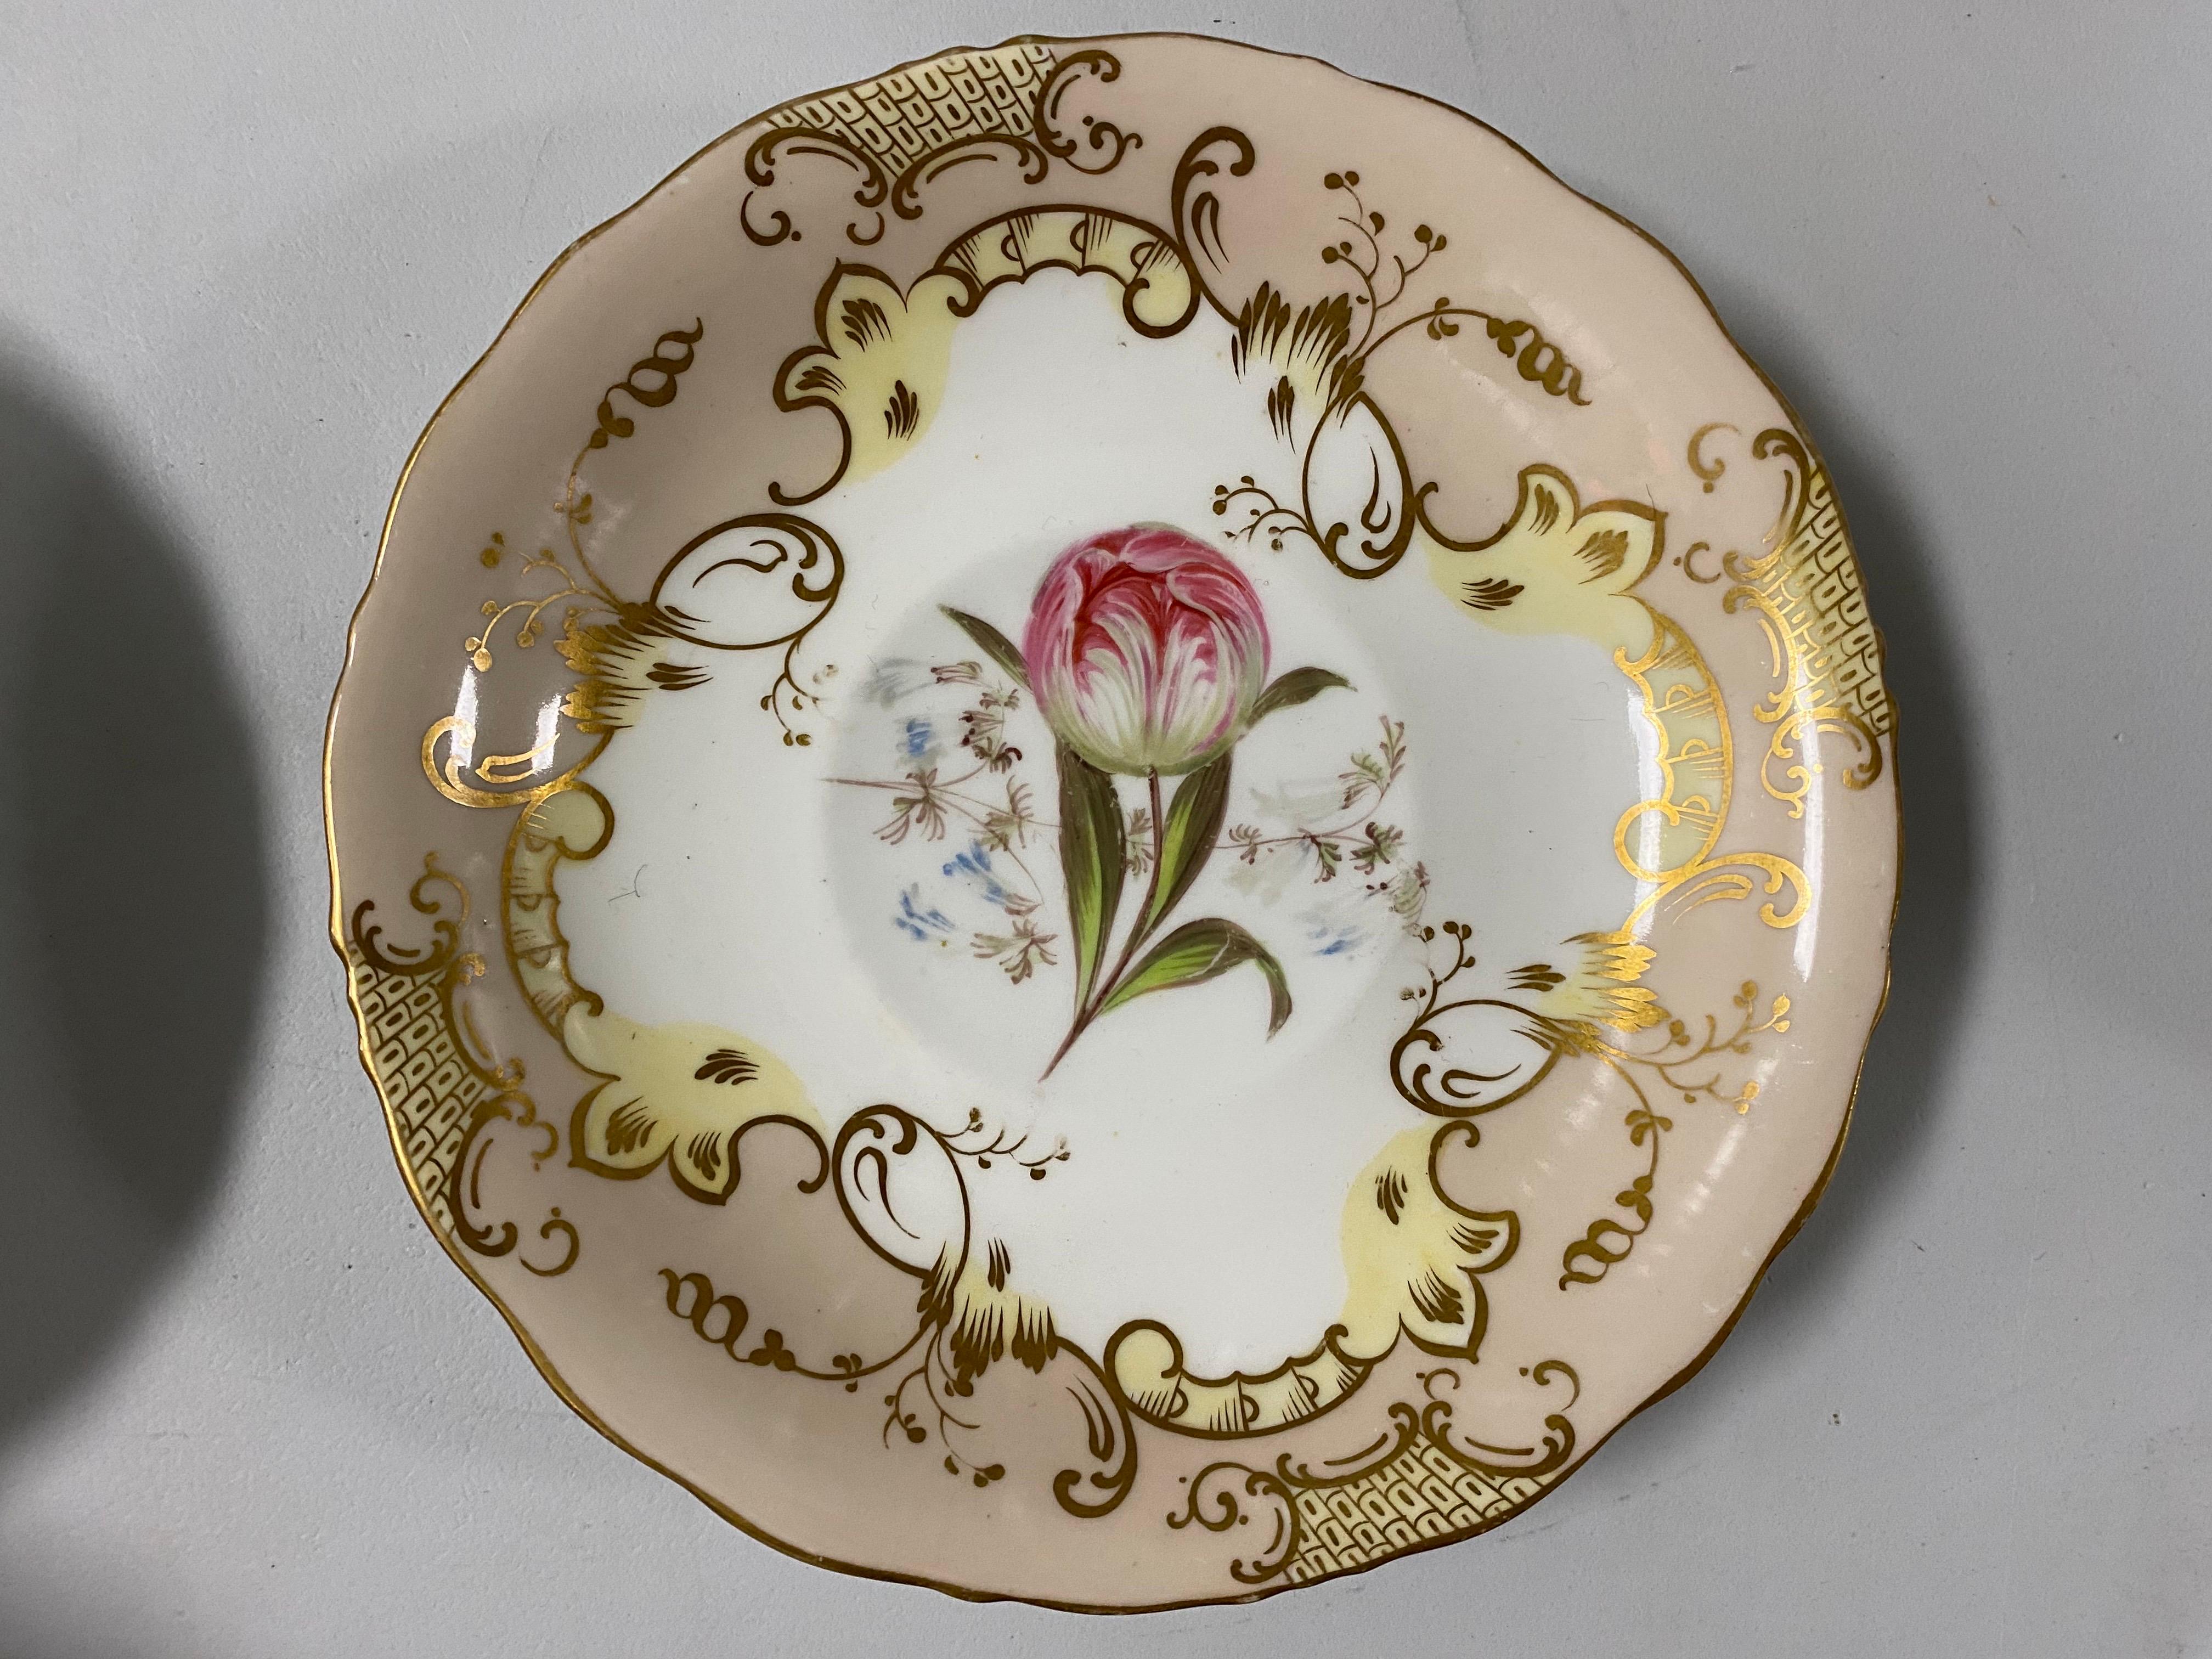 English Pair of Coalport Porcelain Saucers, Beige & Flowers, By Joseph Birbeck, c. 1847 For Sale